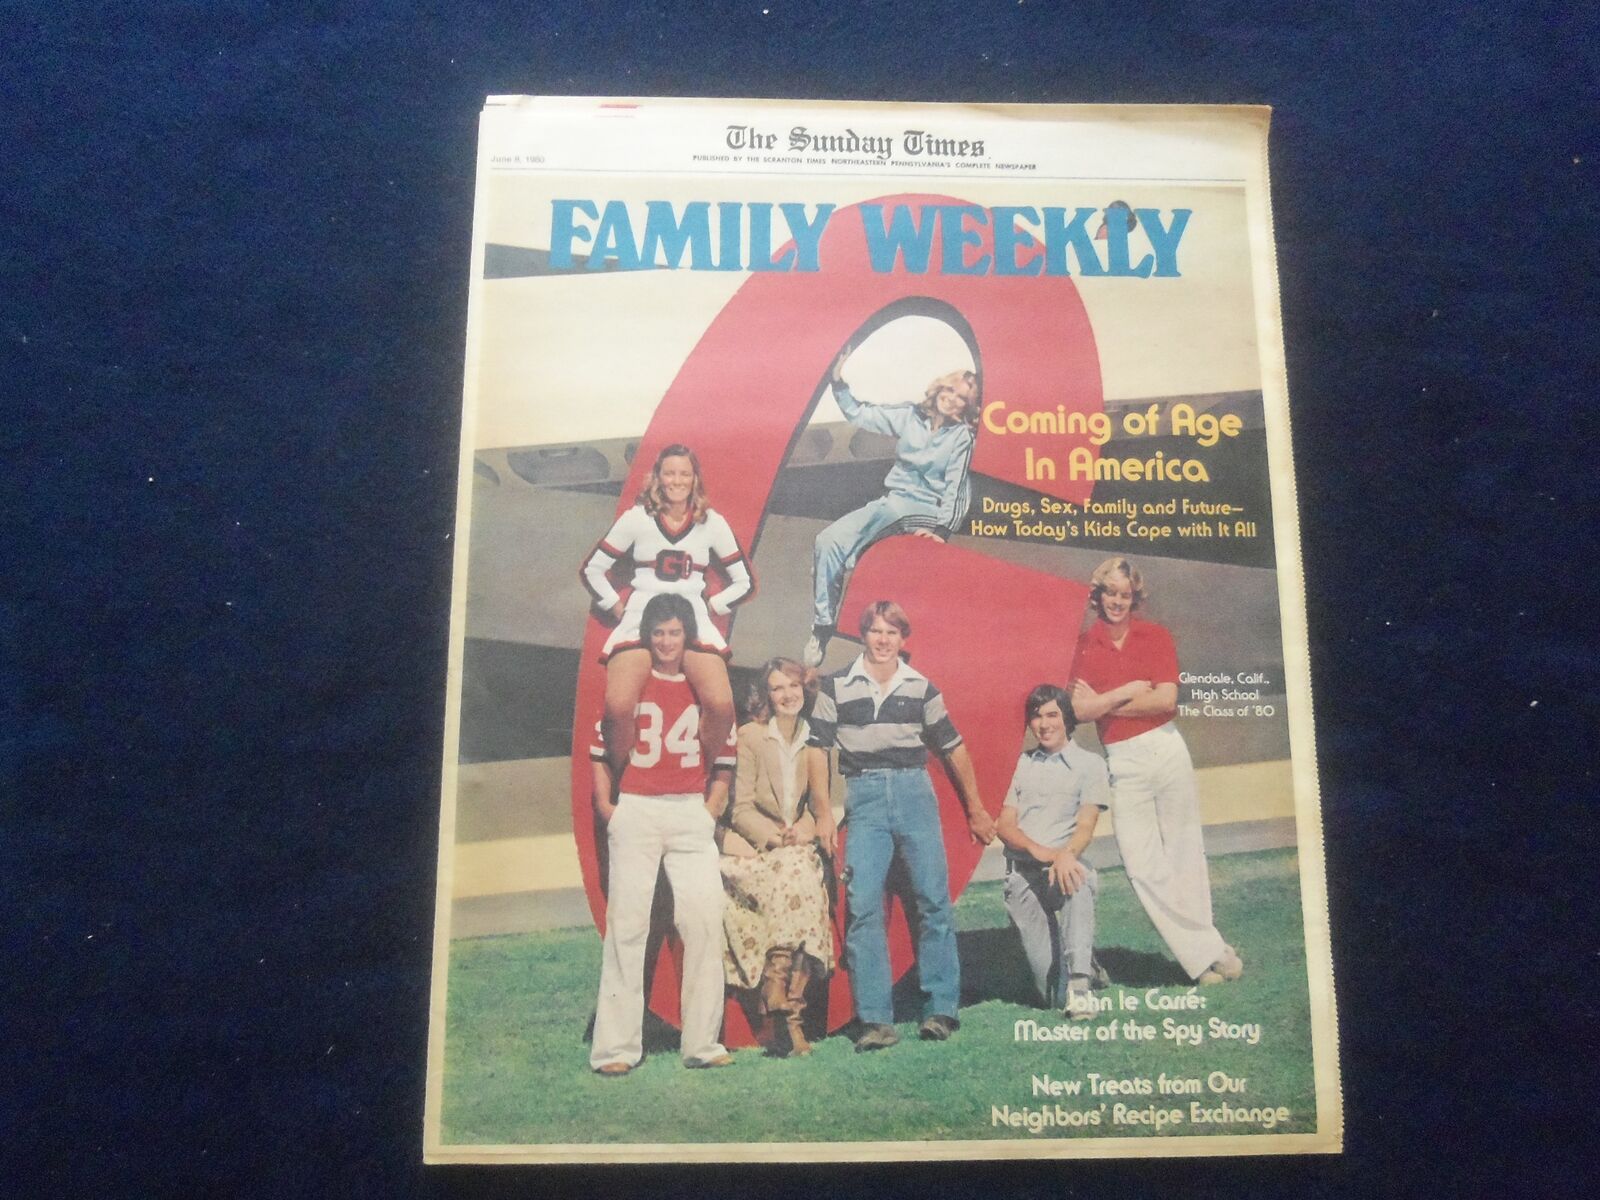 1980 JUNE 8 THE SUNDAY TIMES FAMILY WEEKLY-SCRANTON, PA- COMING OF AGE -NP 6199